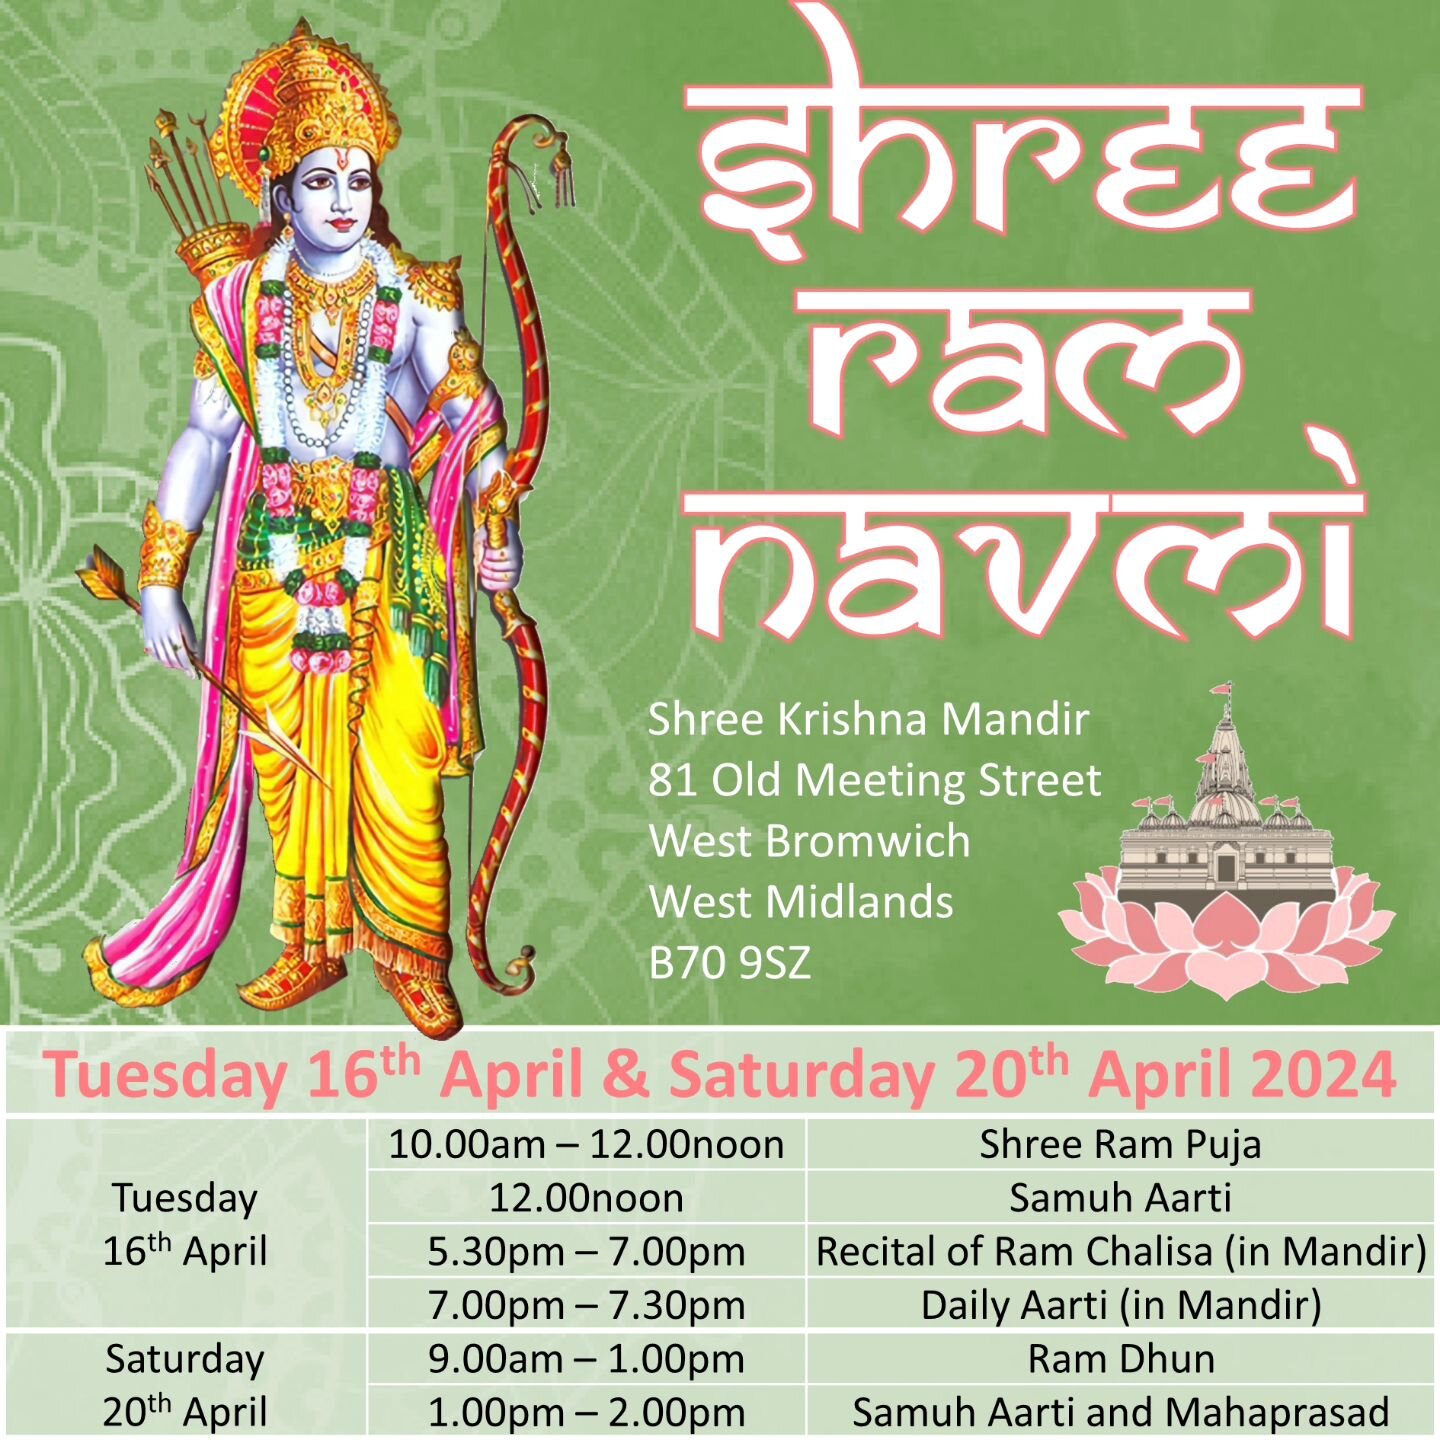 Jai Shree Krishna Everyone 

We will be celebrating Shree Ram Navmi on Tuesday 16th April with Shree Ram Bhagwan's Puja and on Saturday 20th April with 4 hours of Ram Dhun. 

If you would like to take part in the Puja, please let us know. 

We hope t